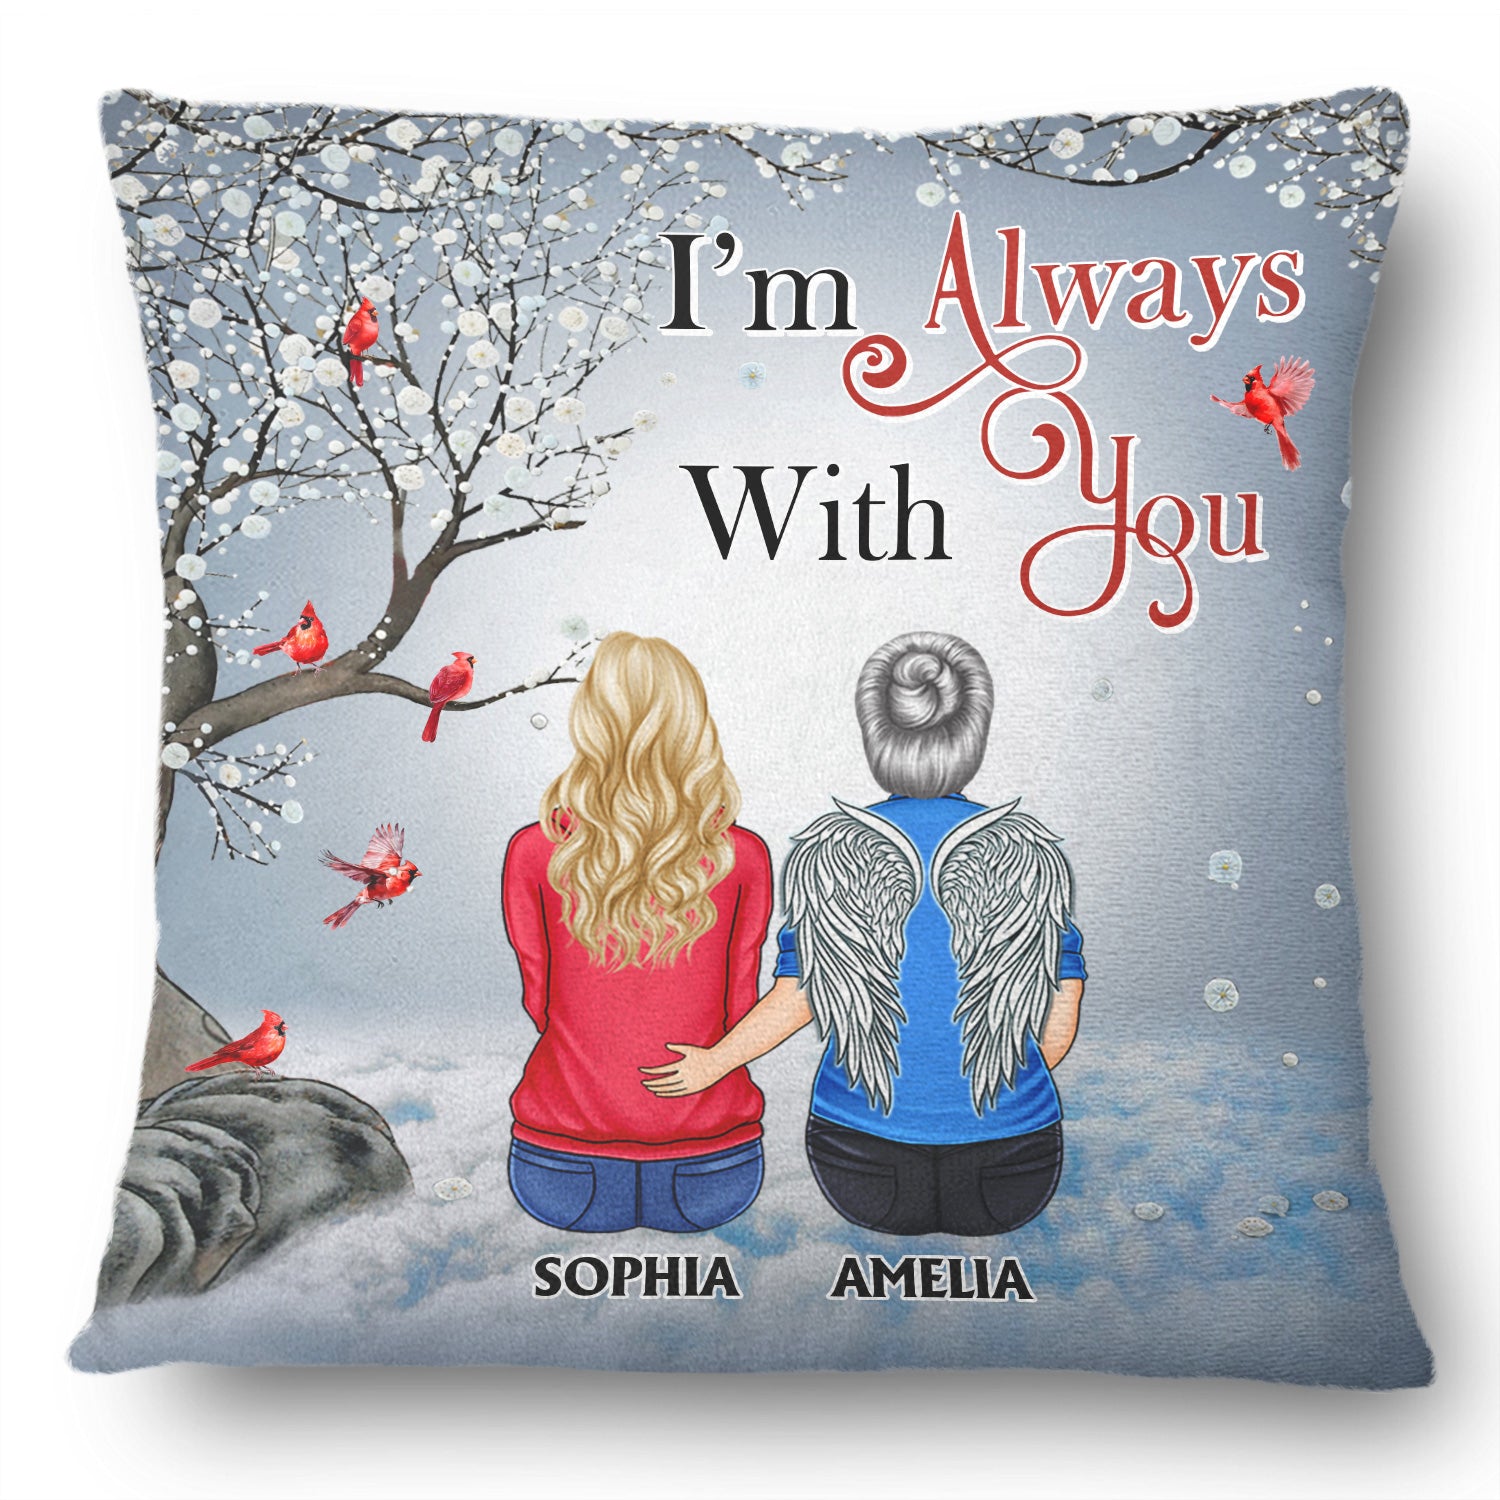 I'm Always With You - Memorial Gift For Family, Friends - Personalized Pillow